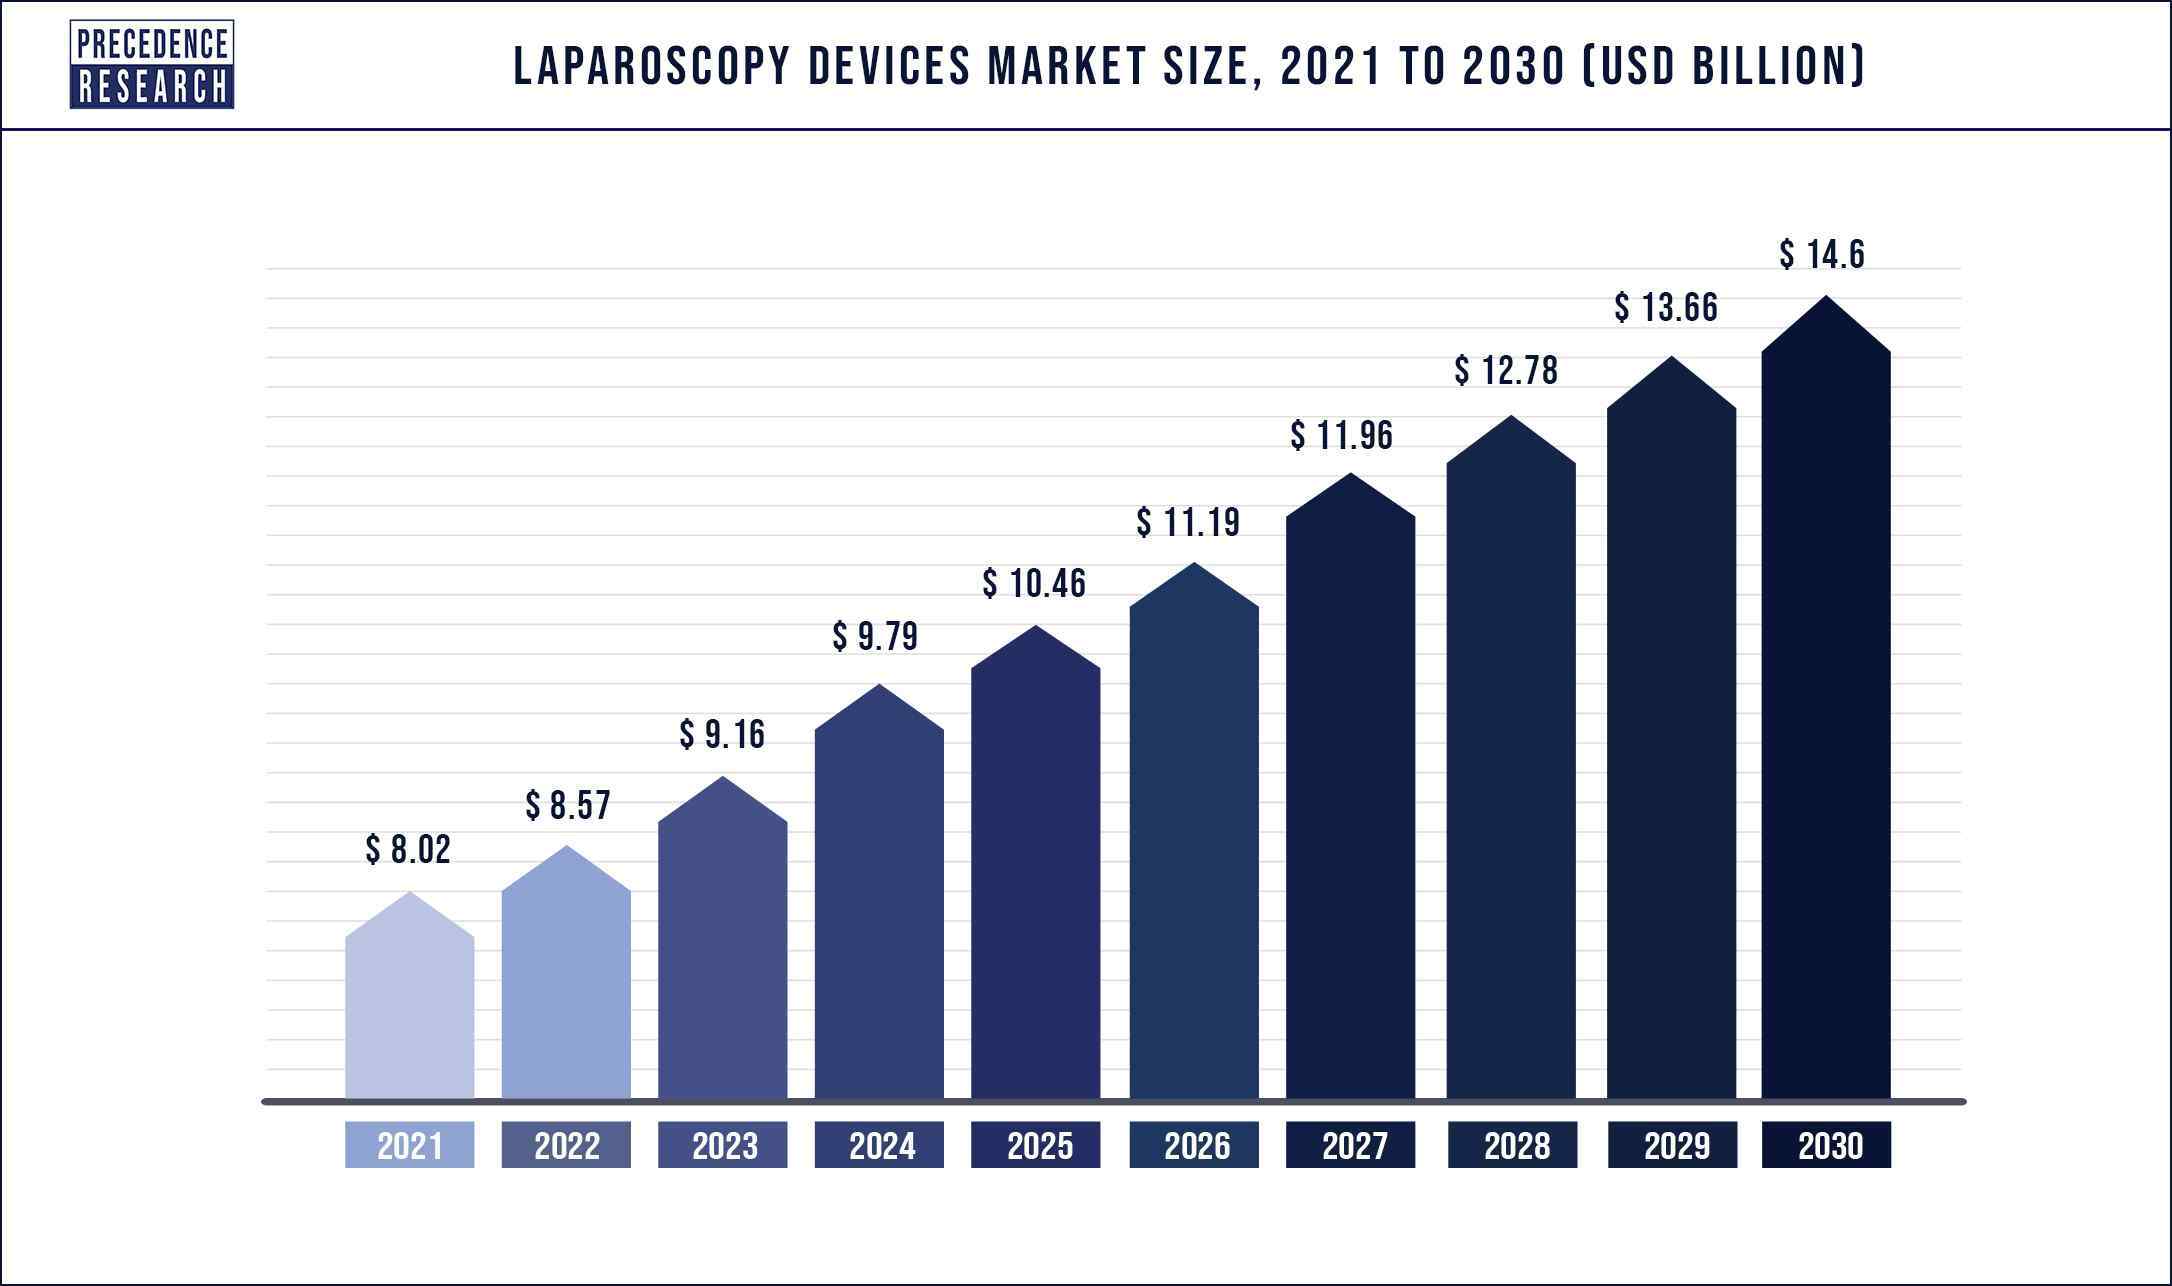 Laparoscopy Devices Market Size To Rise US$ 14.6 Bn By 2030